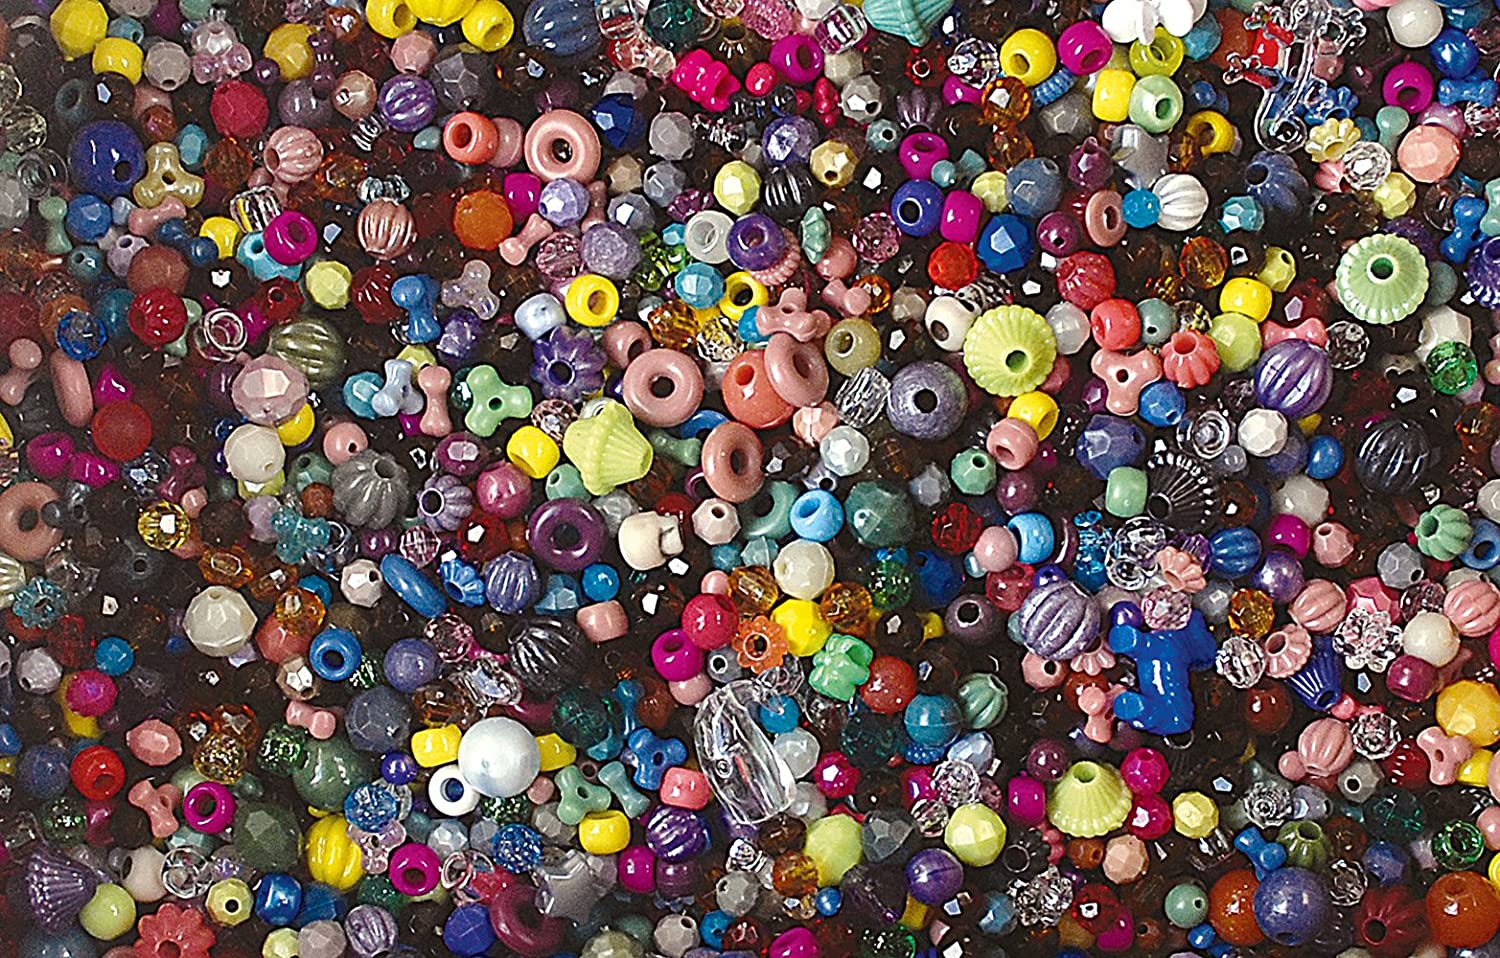 The Beadery Bonanza 5lb of Mixed Craft Beads Sizes Multicolor